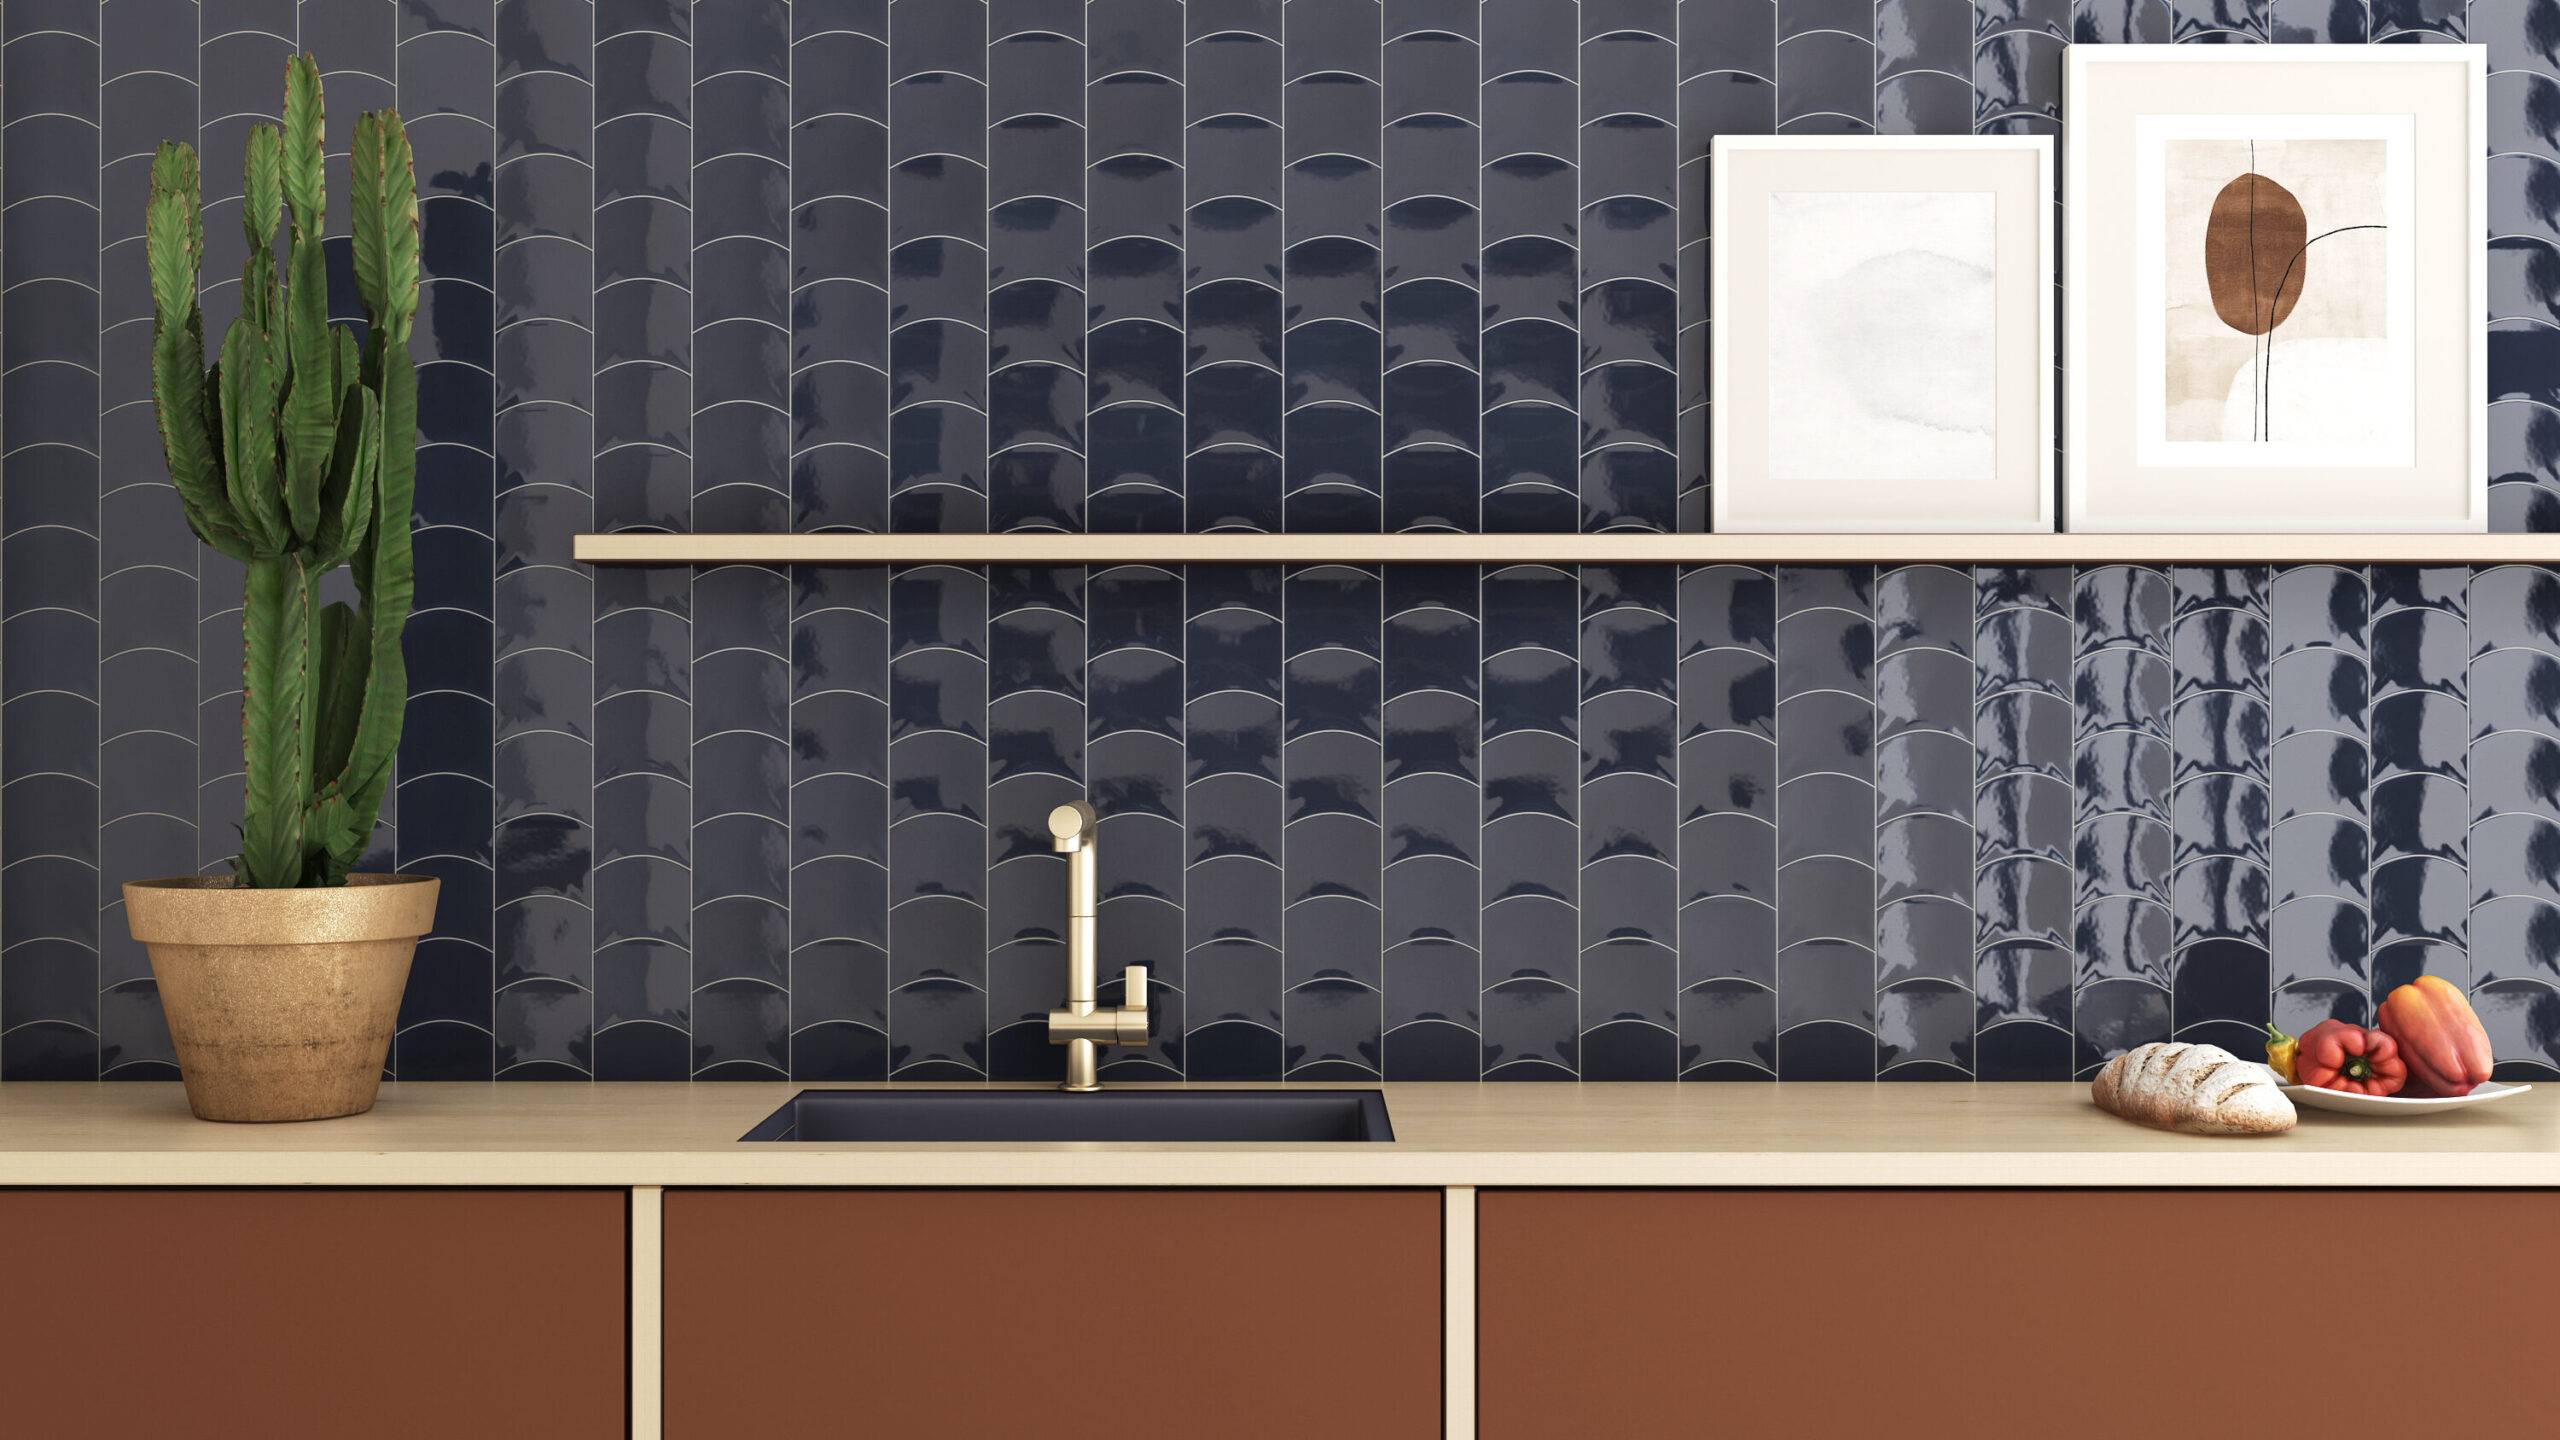 Wavy blue ceramic wall tiles behind a kitchen counter and brown cabinets.